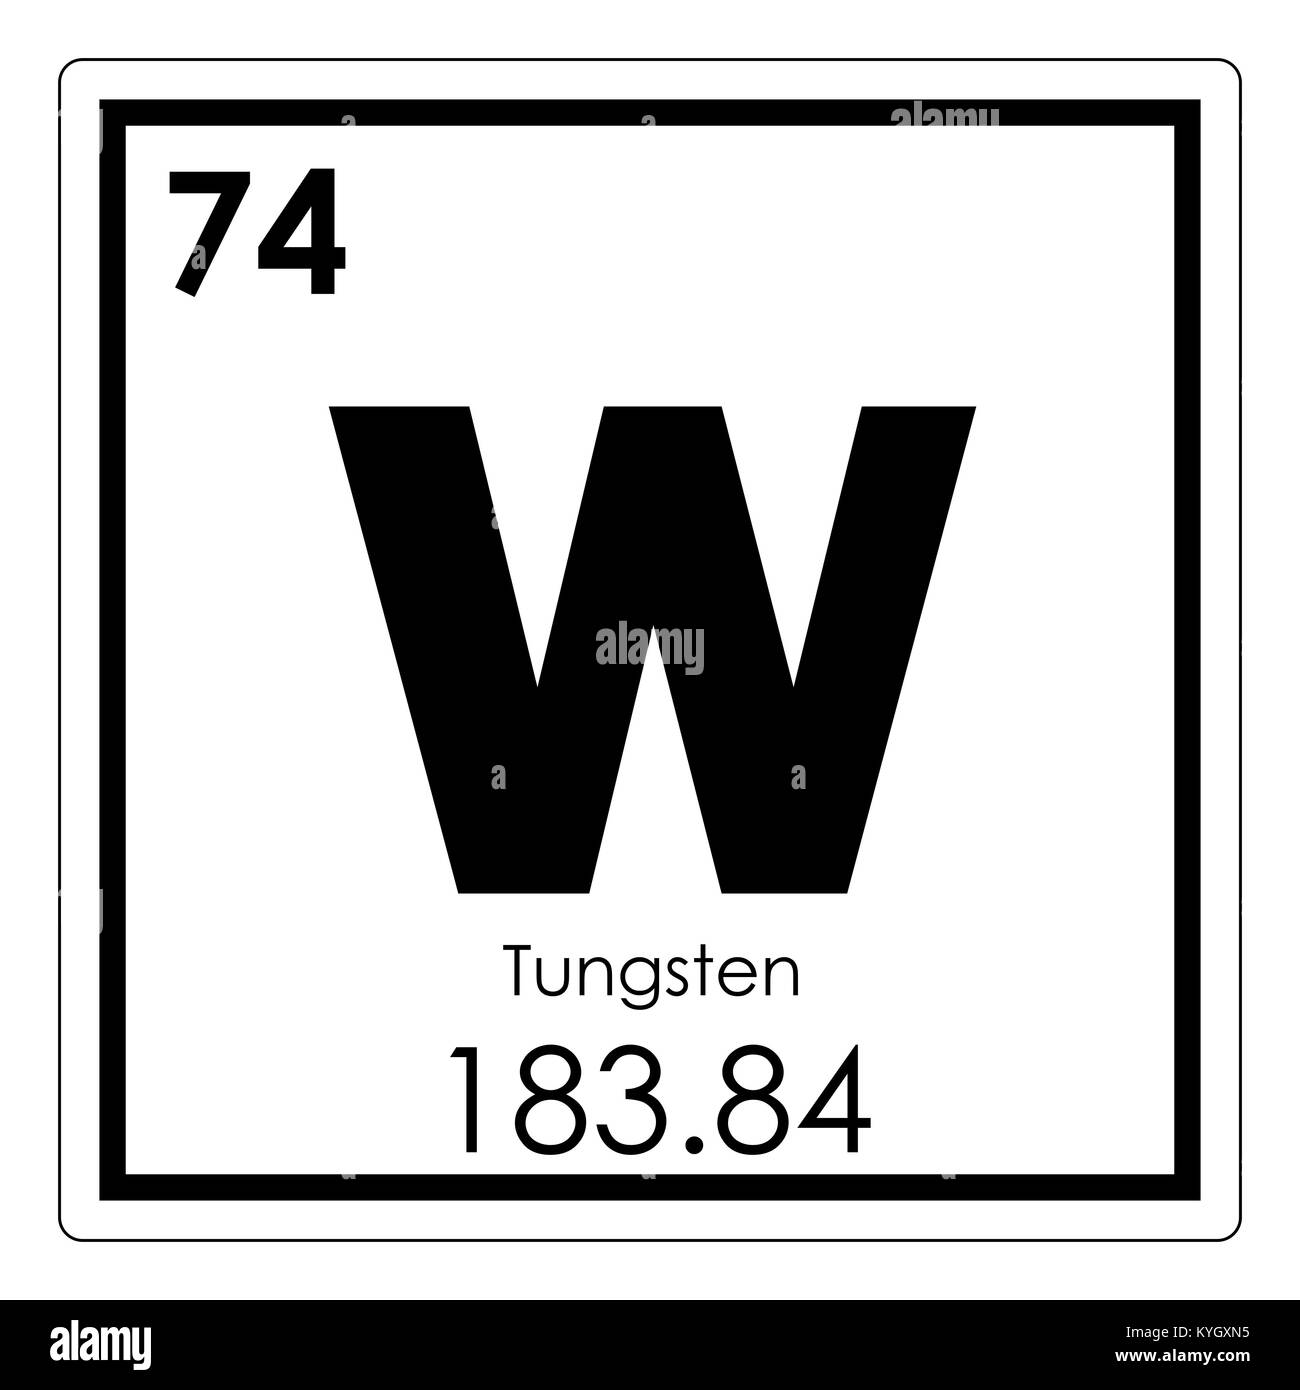 Tungsten chemical element periodic table science symbol Stock Photo - Alamy